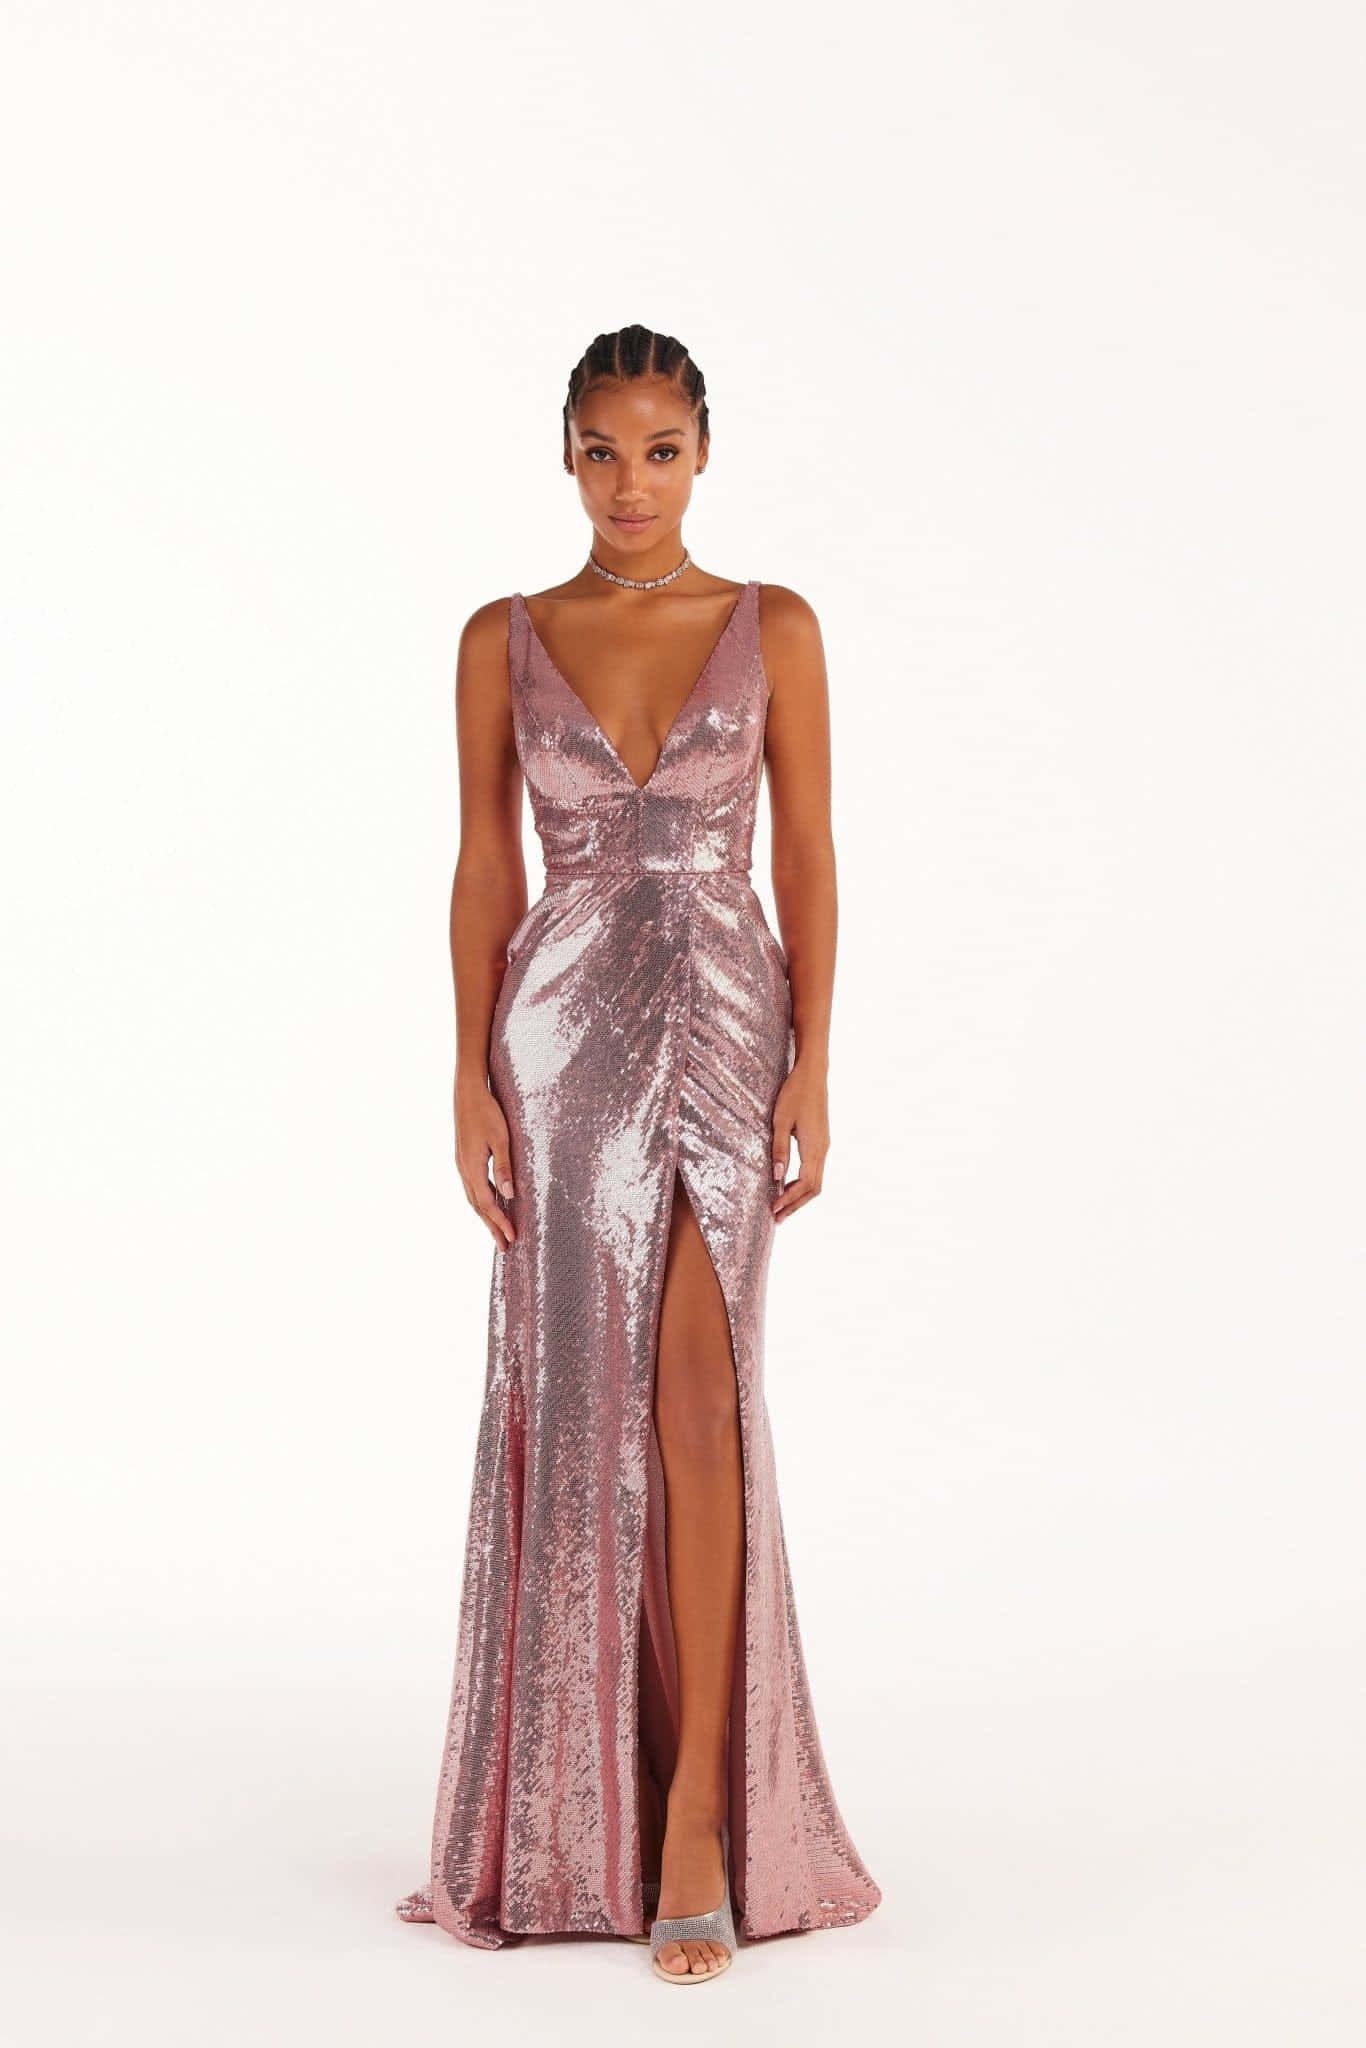 A Model Wearing A Pink Sequin Gown